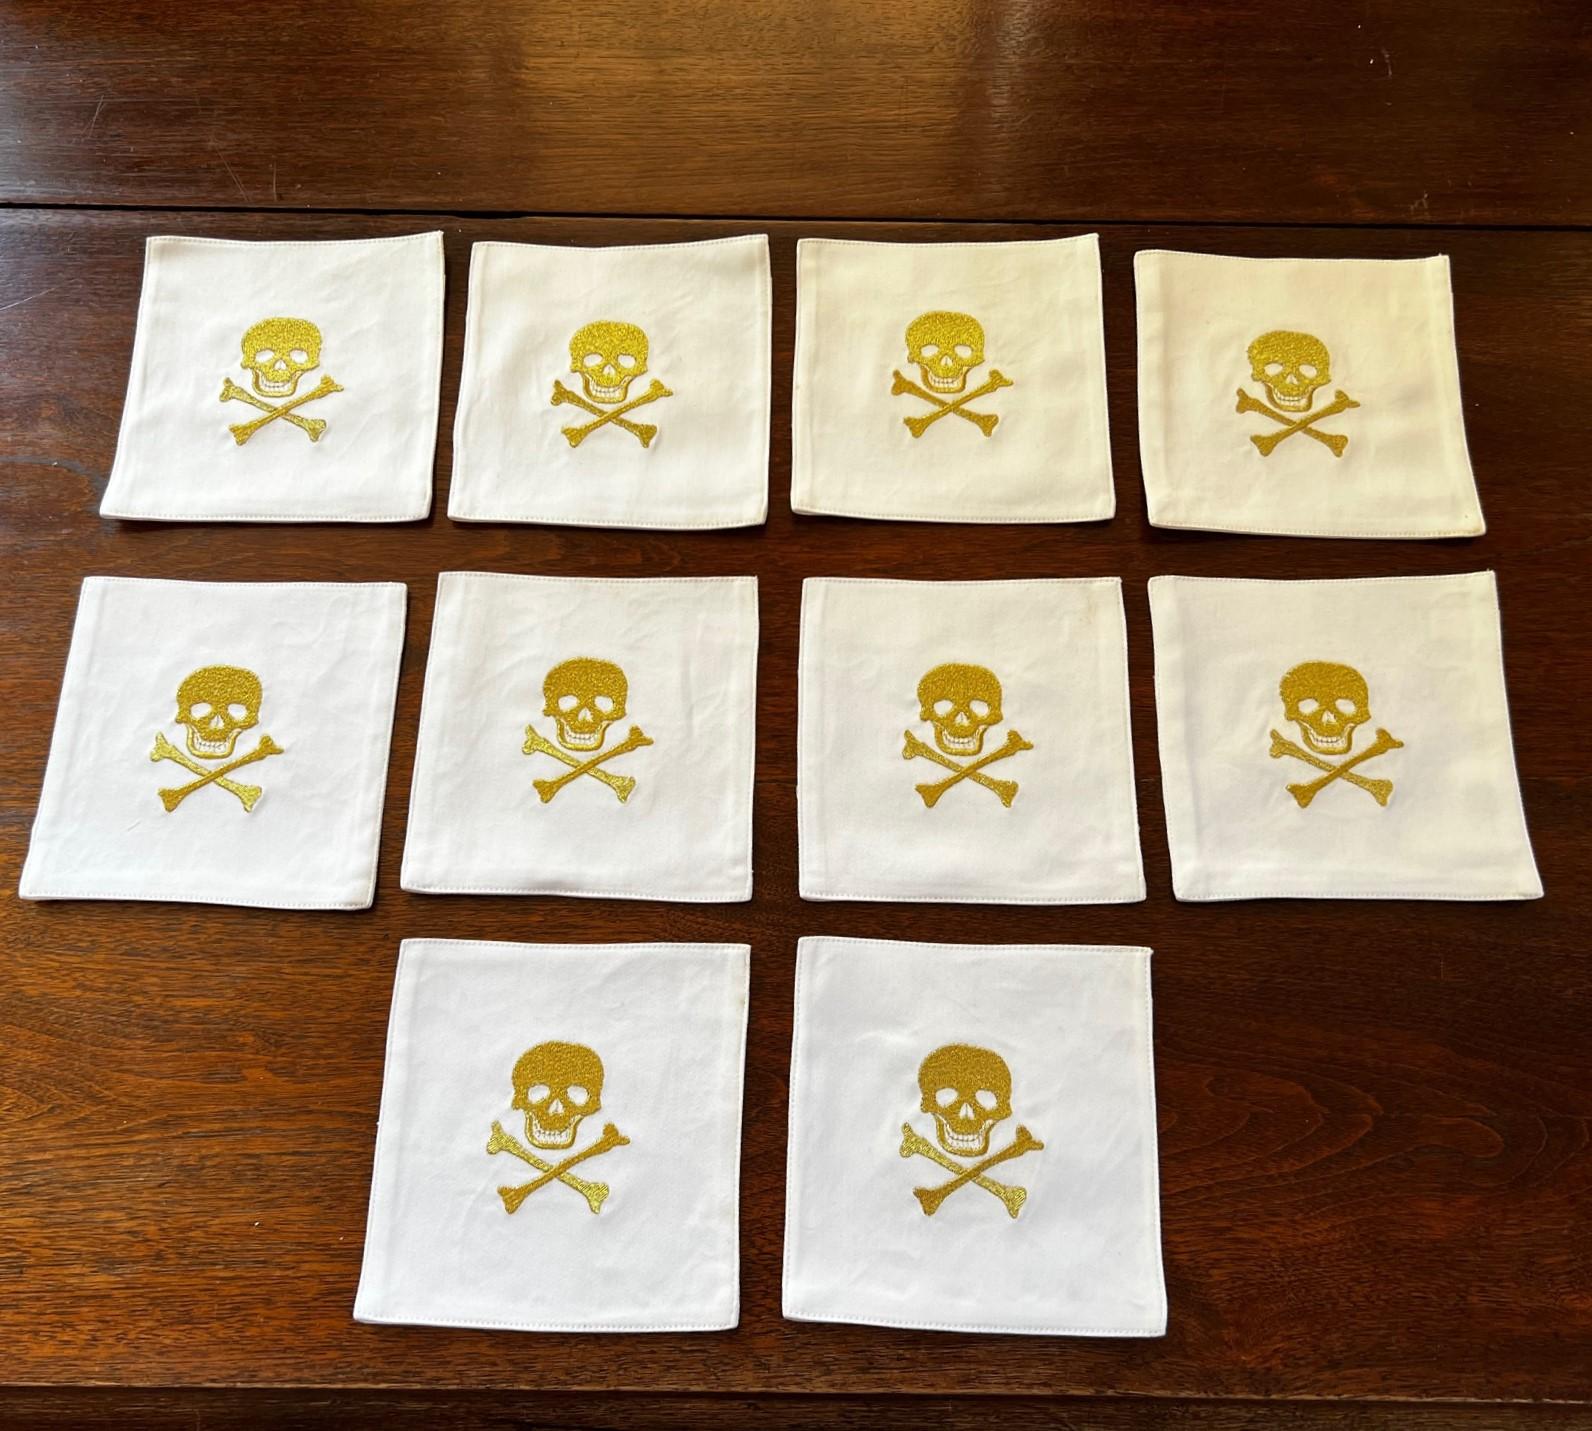 Late 20th C. a set of 10 white cotton cocktail napkins embroidered with a skull and crossbone design in a gold colored thread.

The perfect way to welcome your guests and dress up a cocktail hour. These beautiful, machine embroidered skull designs